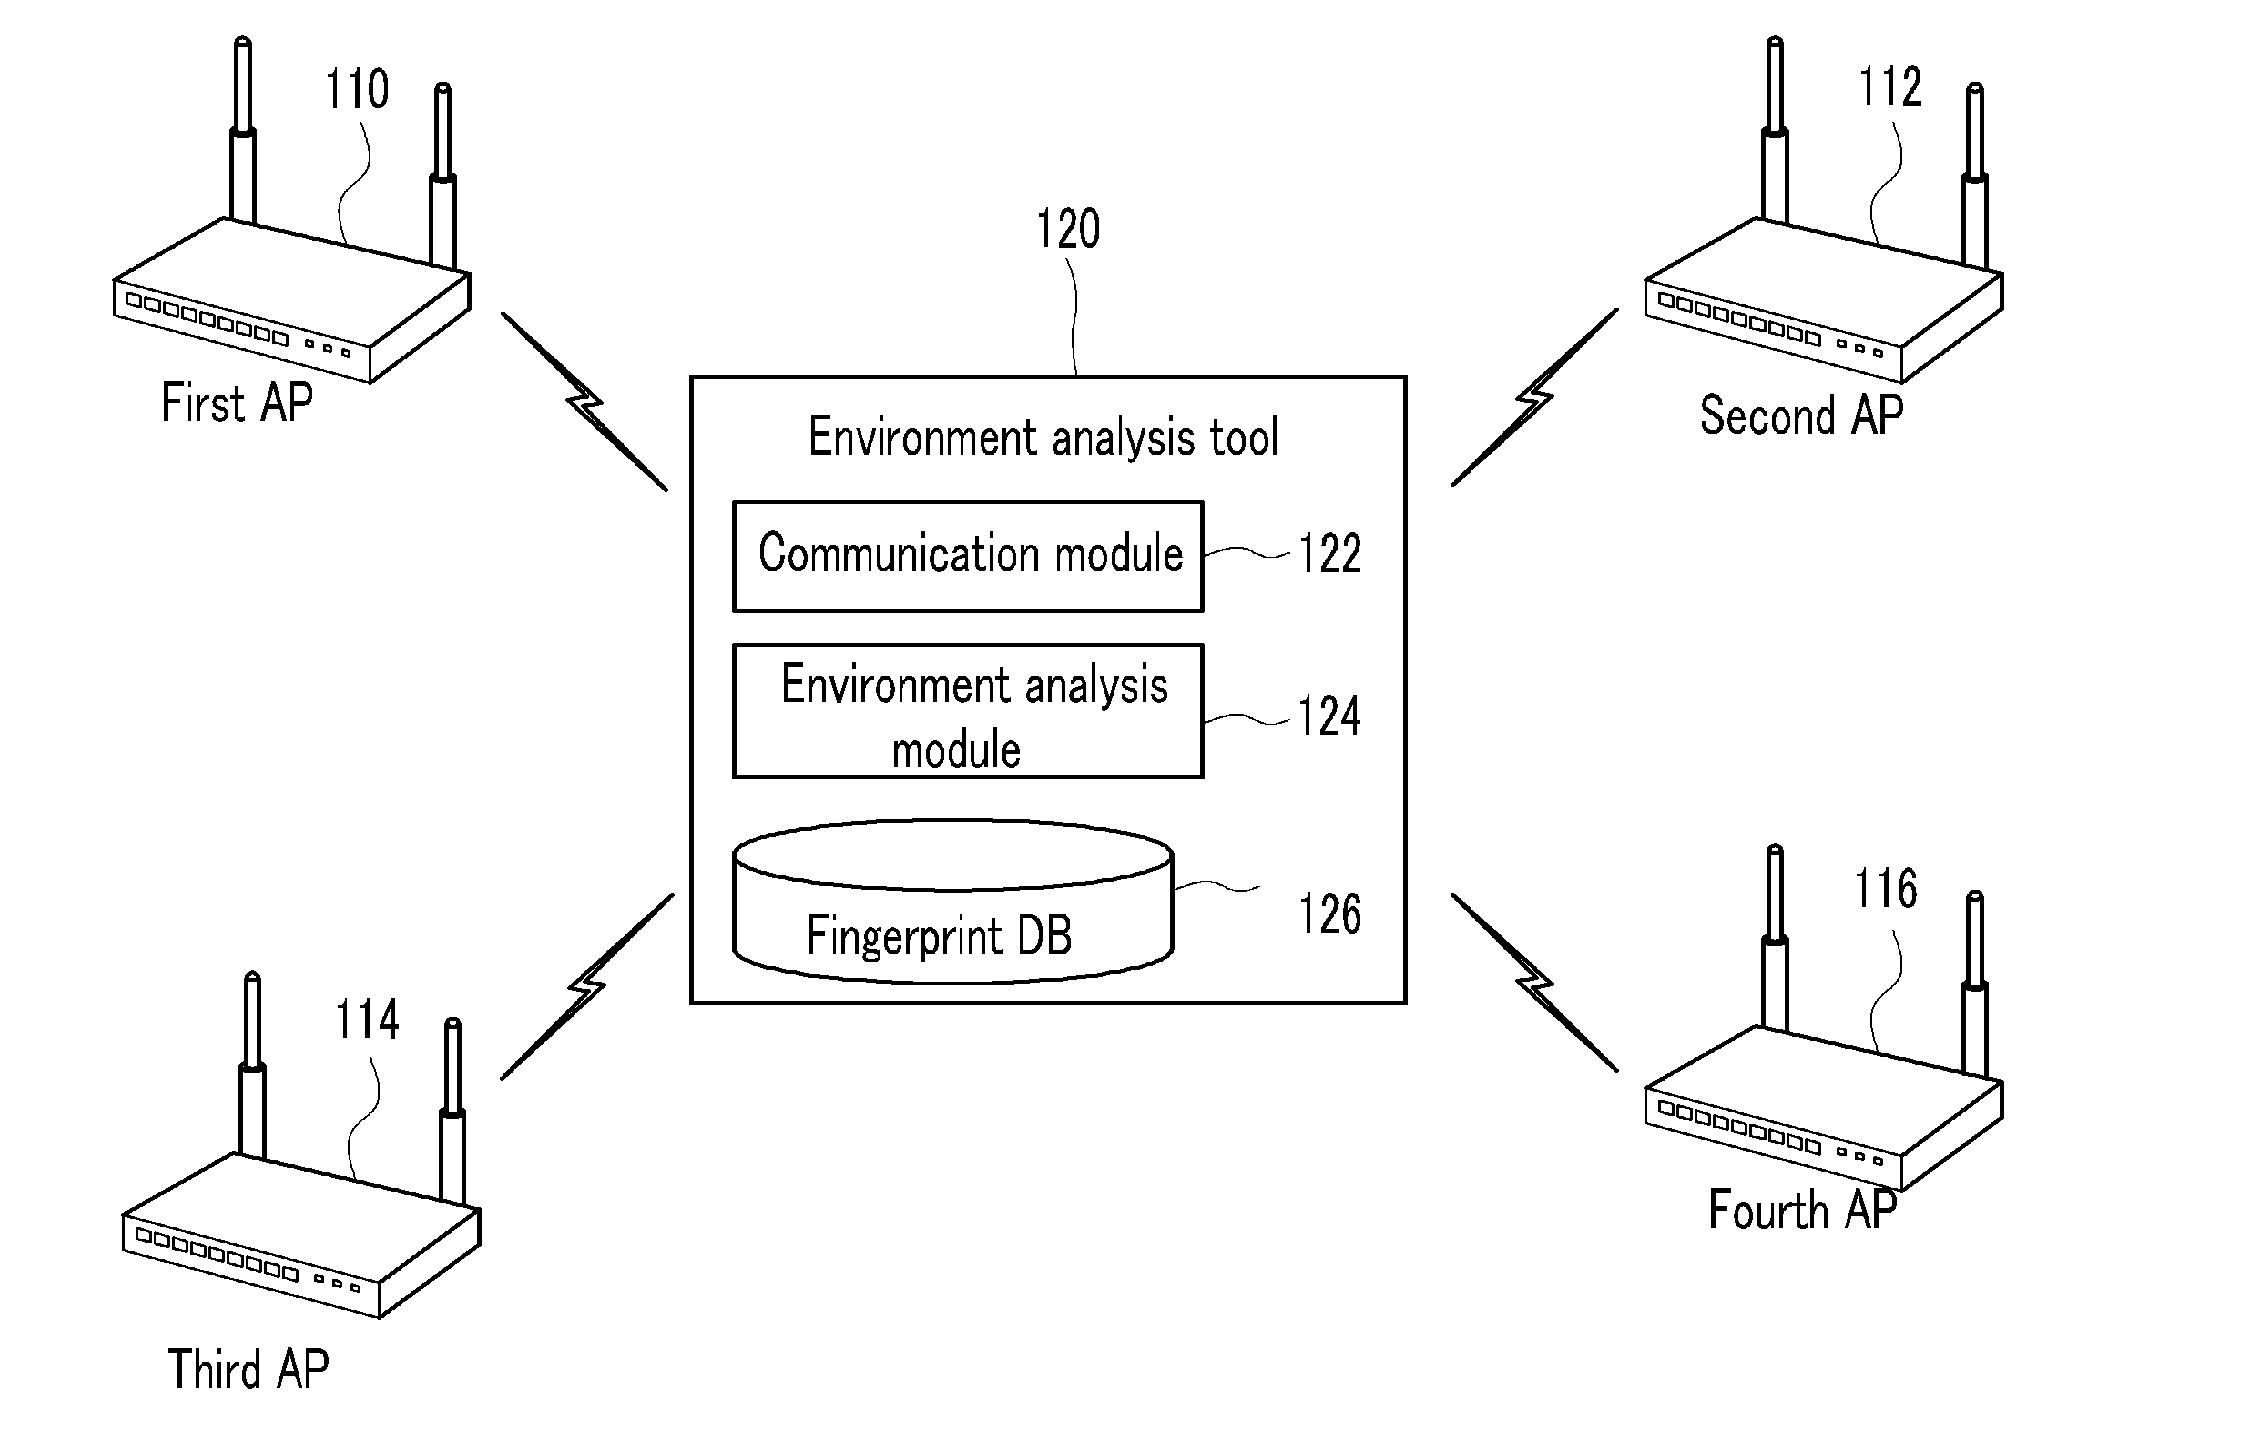 Method of automatically generating fingerprint database for an indoor wireless location